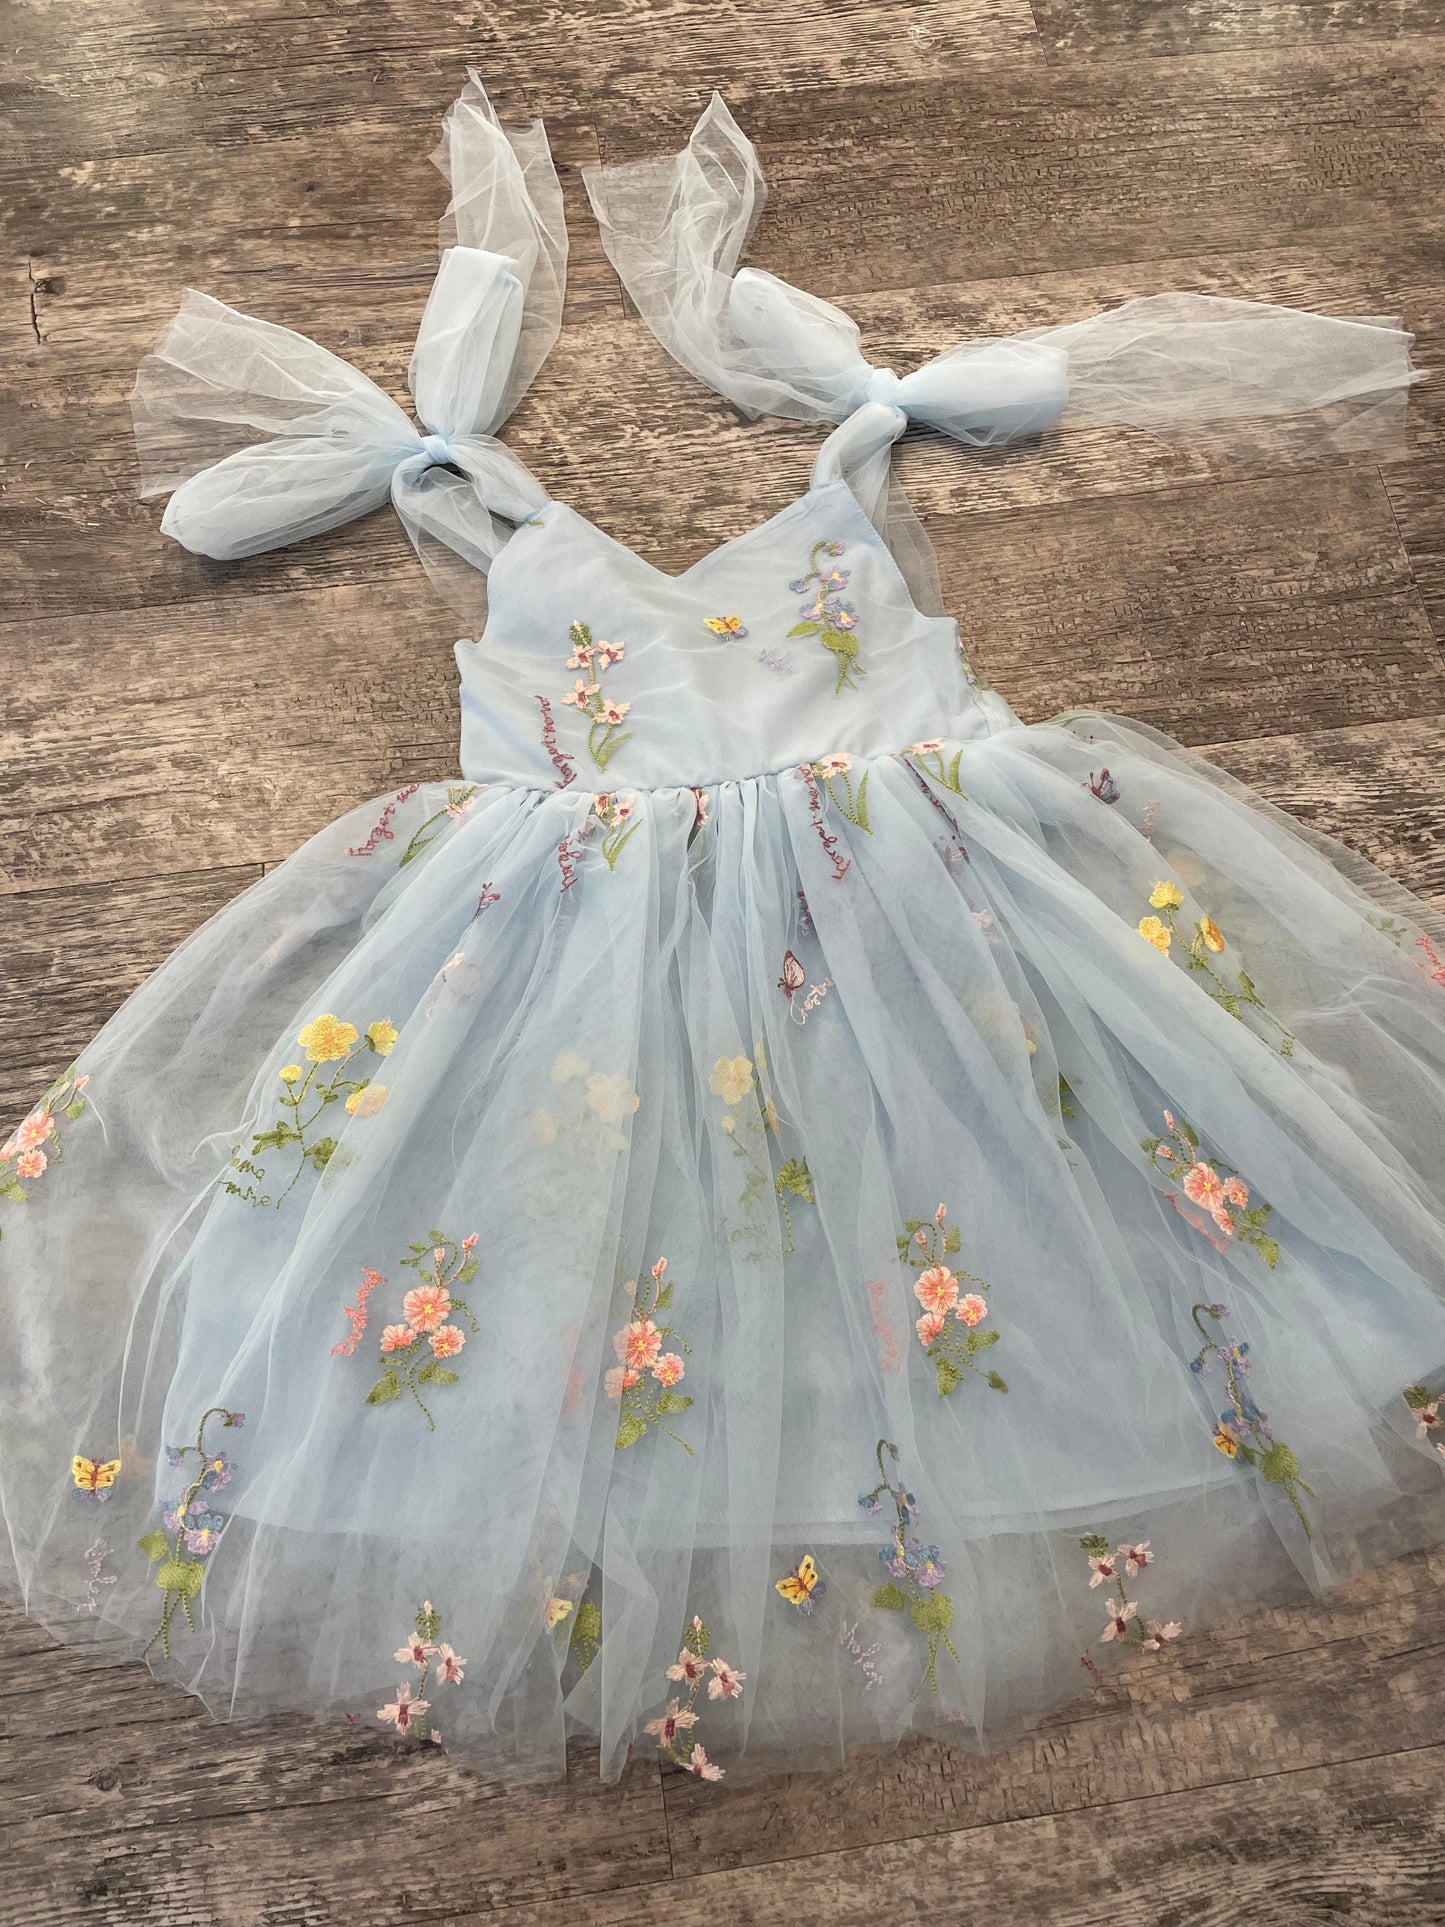 The Forget me not dress